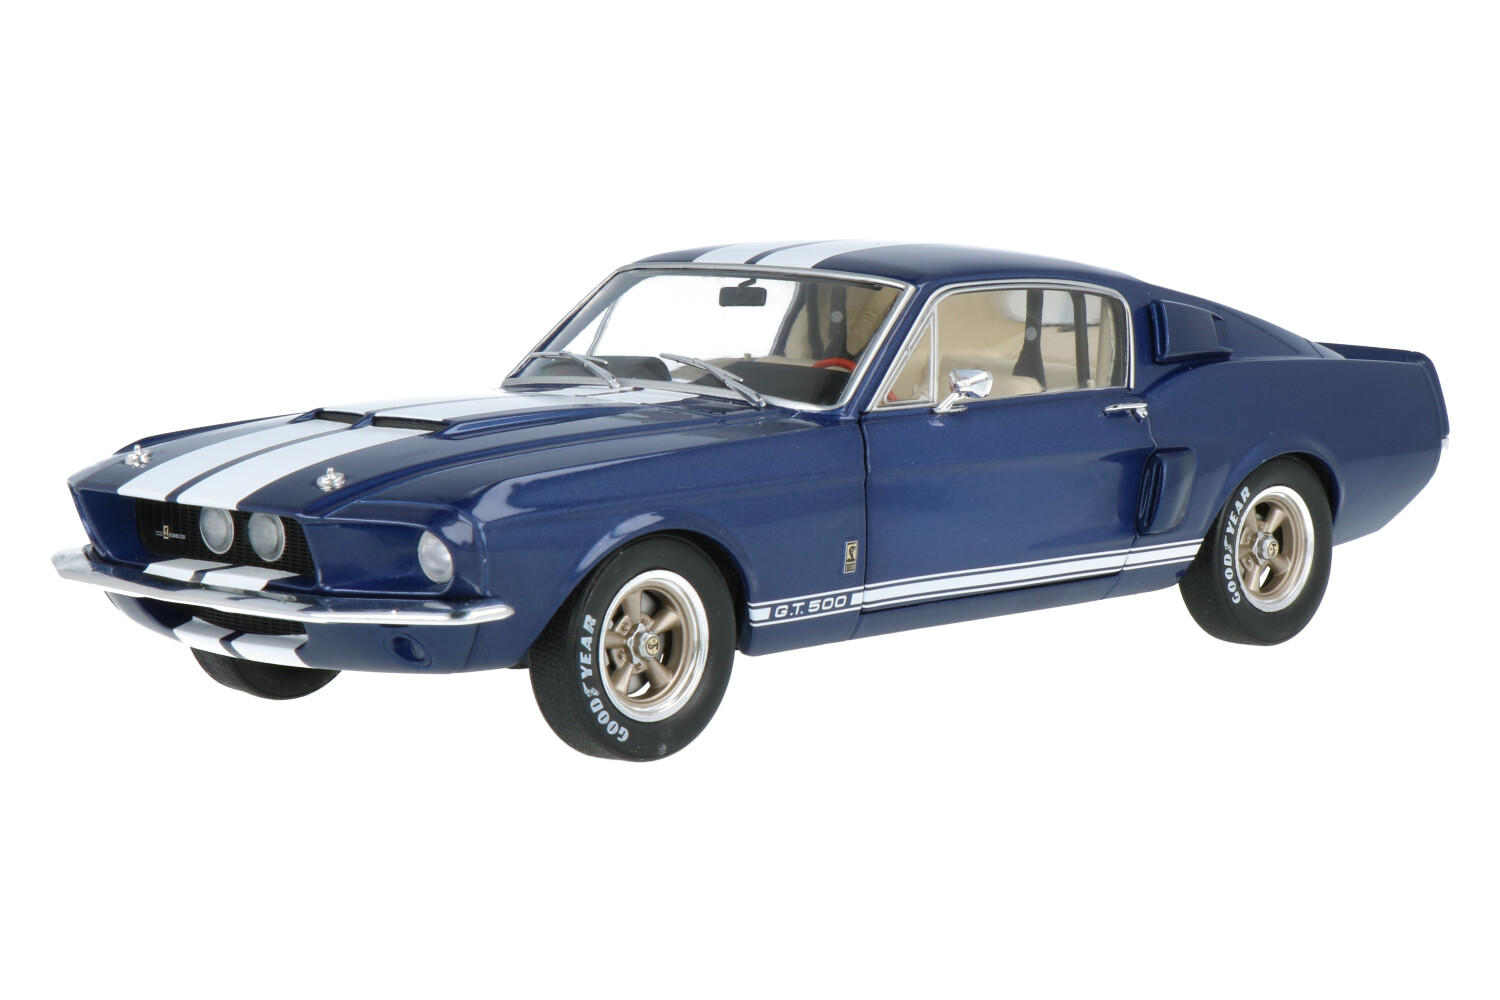 Ford-Mustang-Shelby-GT500-Fastback-S1802903_13153663506008641Ford-Mustang-Shelby-GT500-Fastback-S1802903_Houseofmodelcars_.jpg